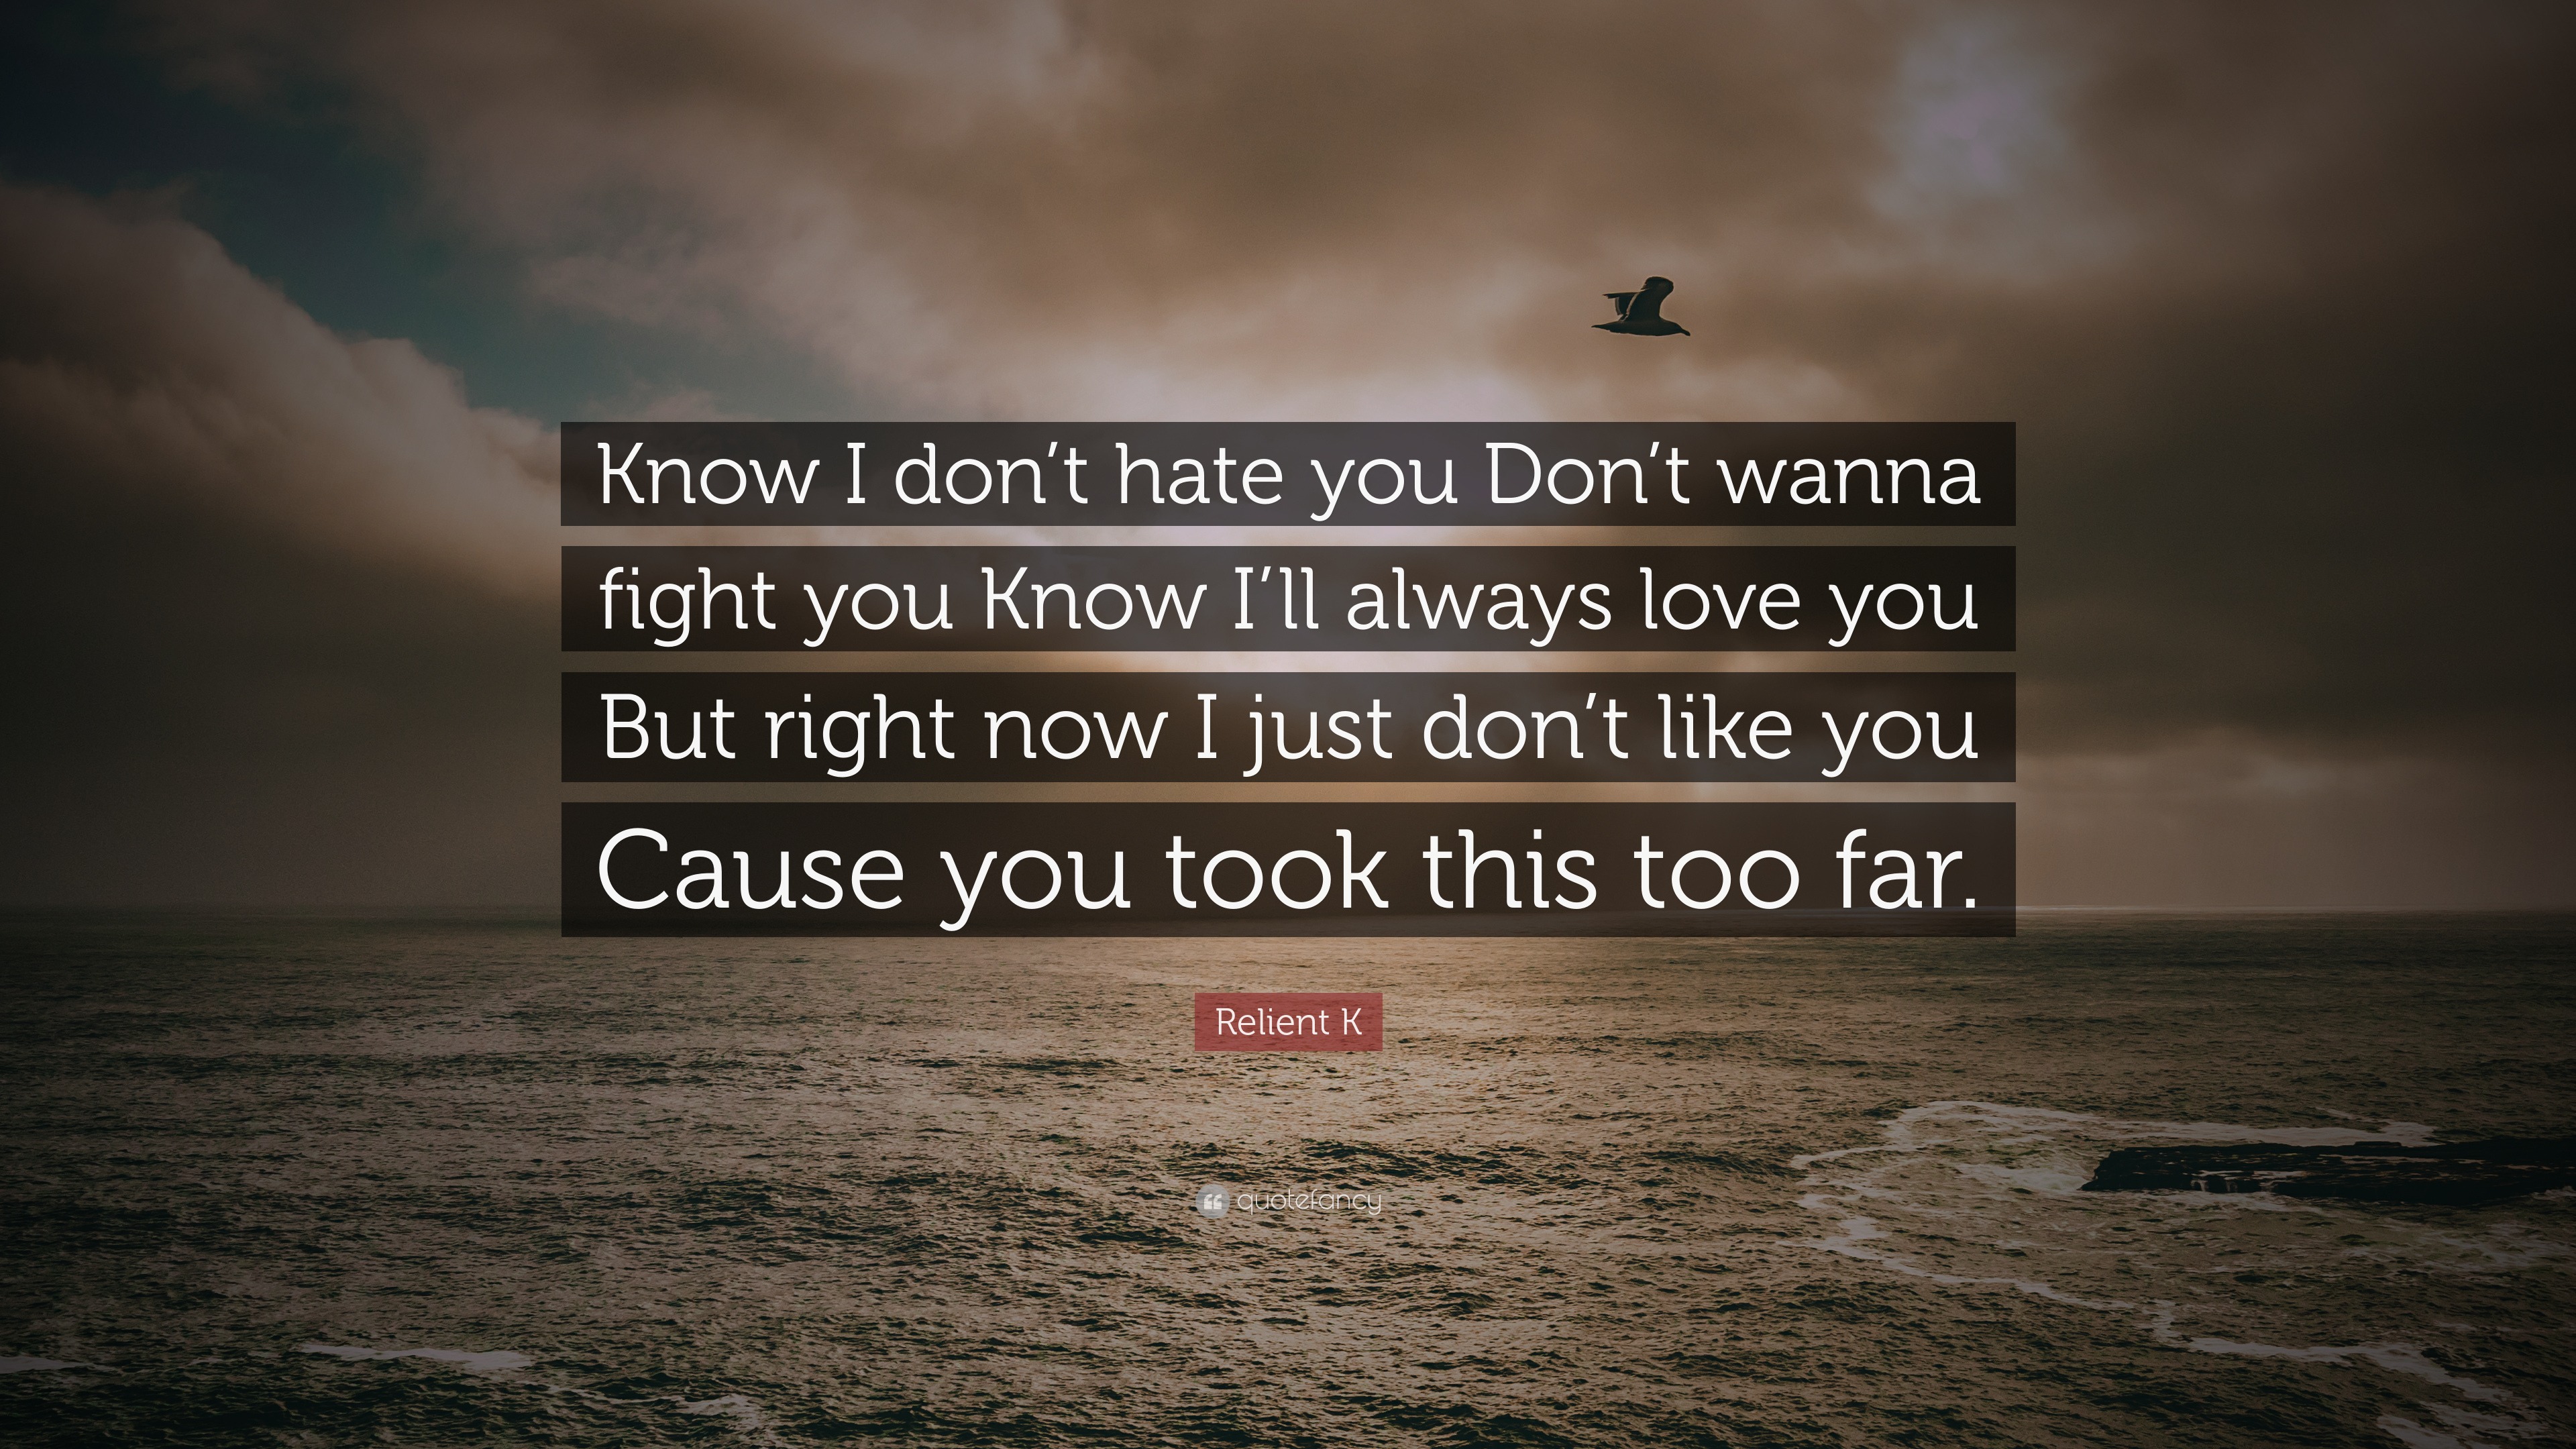 Relient K Quote “Know I don t hate you Don t wanna